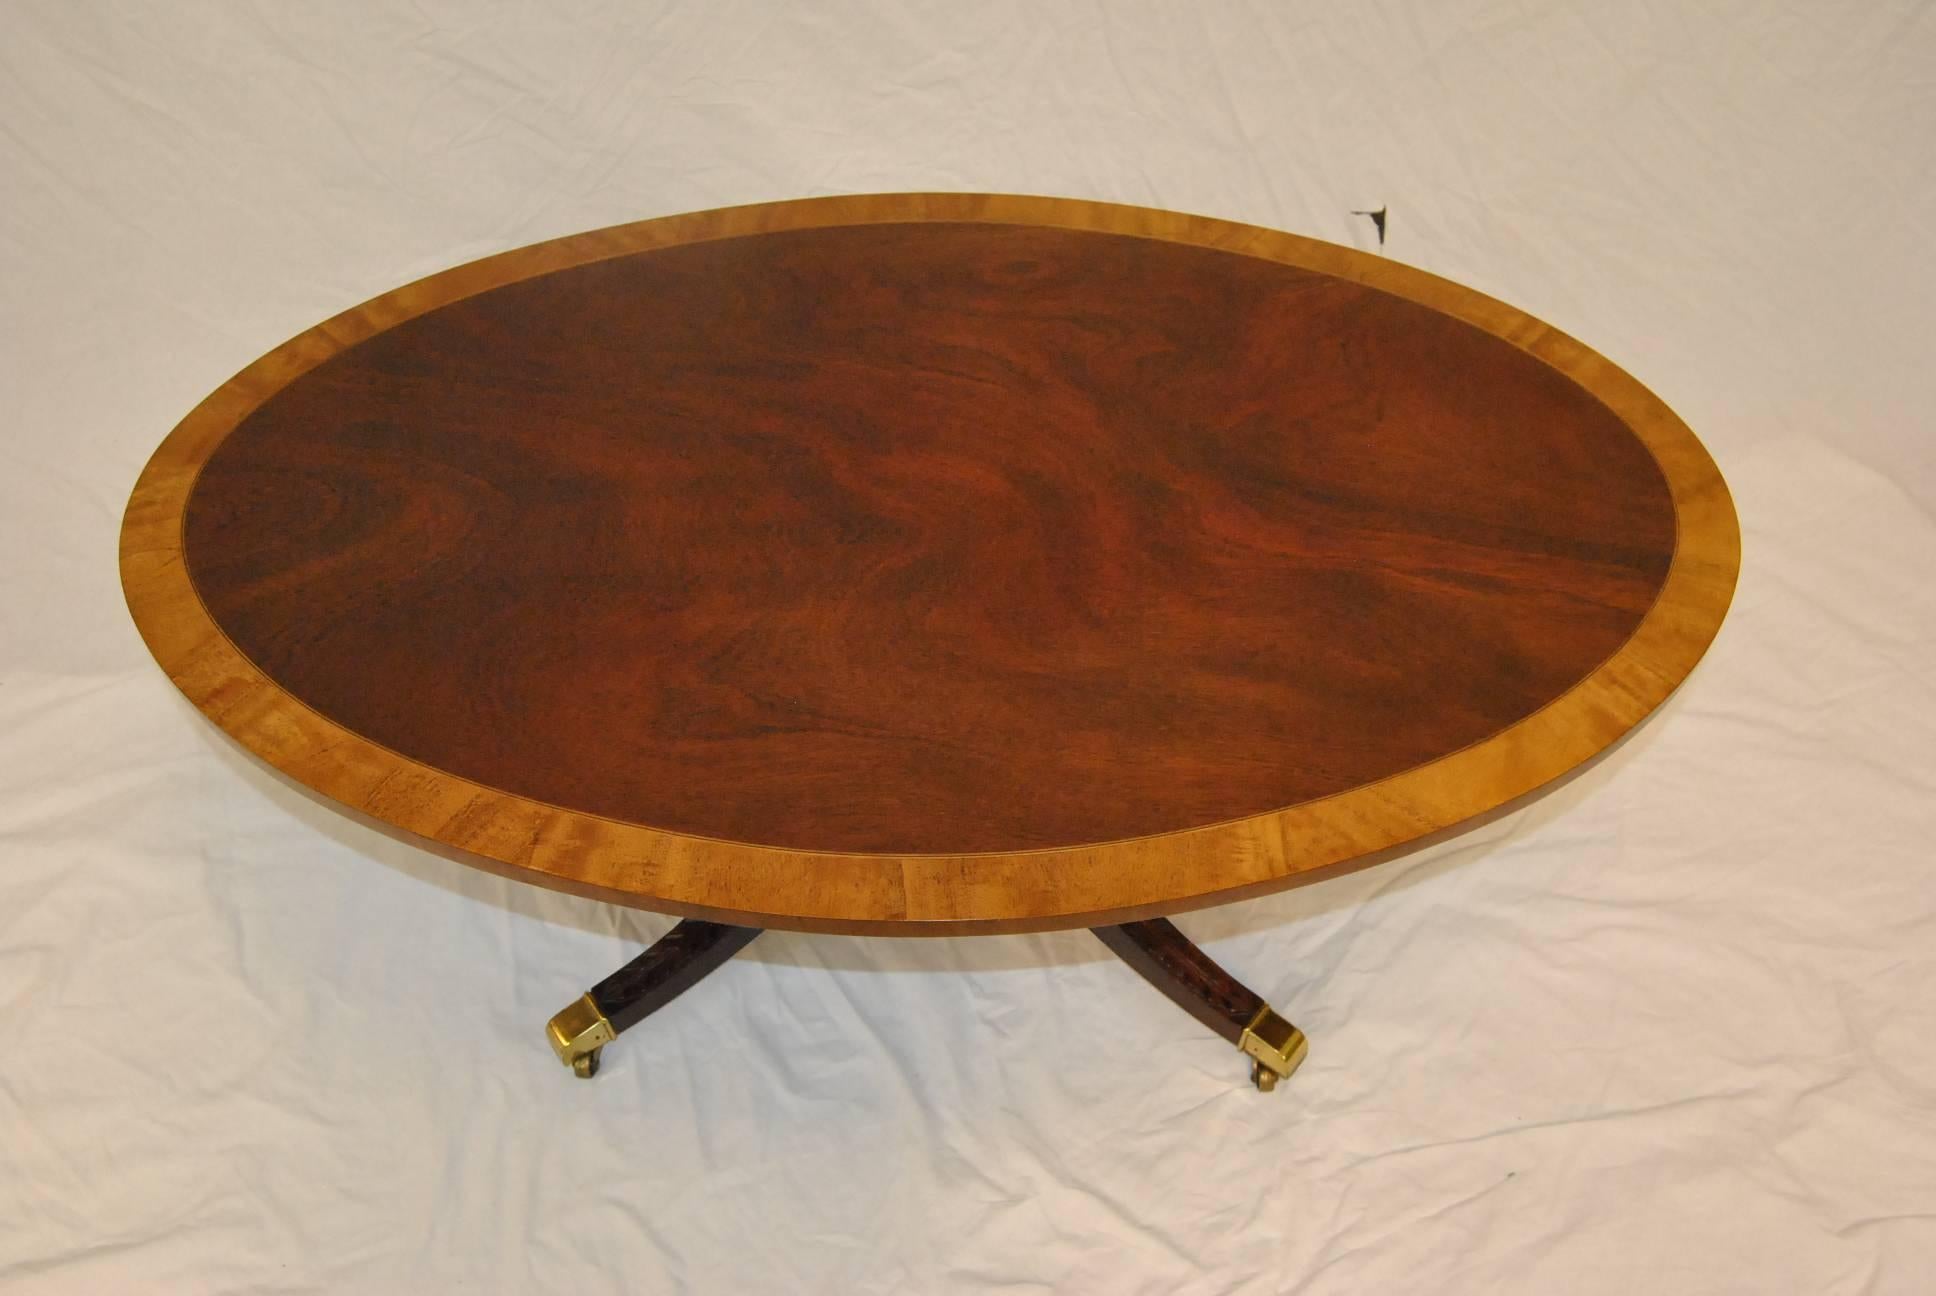 An elegant coffee table by Kindel Furniture. This beautiful piece features a banded oval top with a pedestal base and four fluted legs with capped brass feet. This will make a lovely addition to your decor.